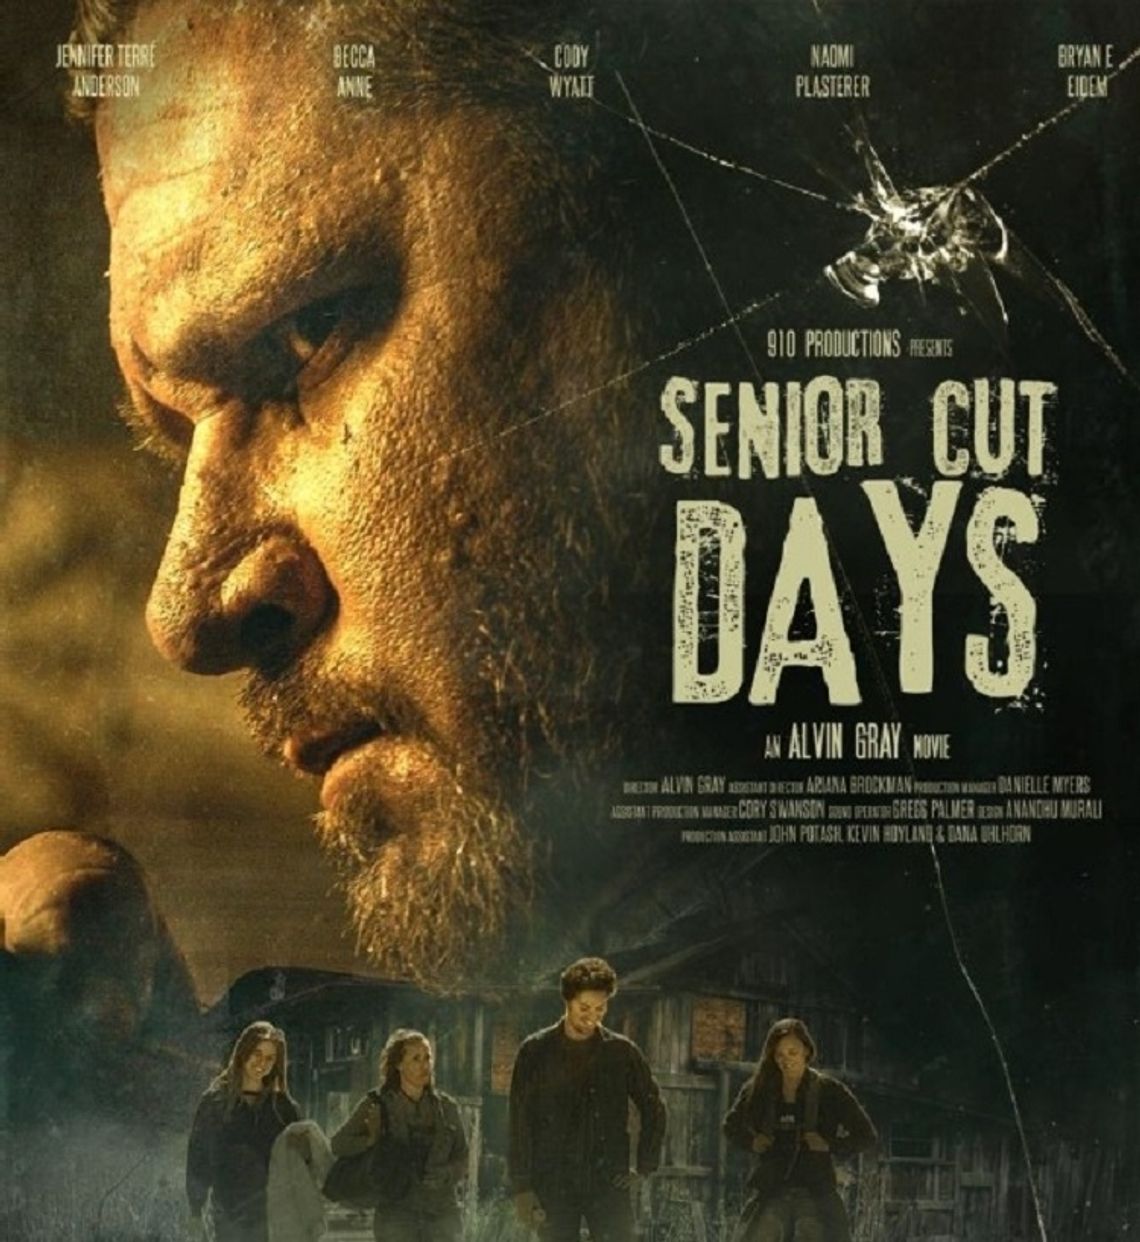 Senior Cut Days - a Made in Nevada Movie Premiers in Fallon Friday